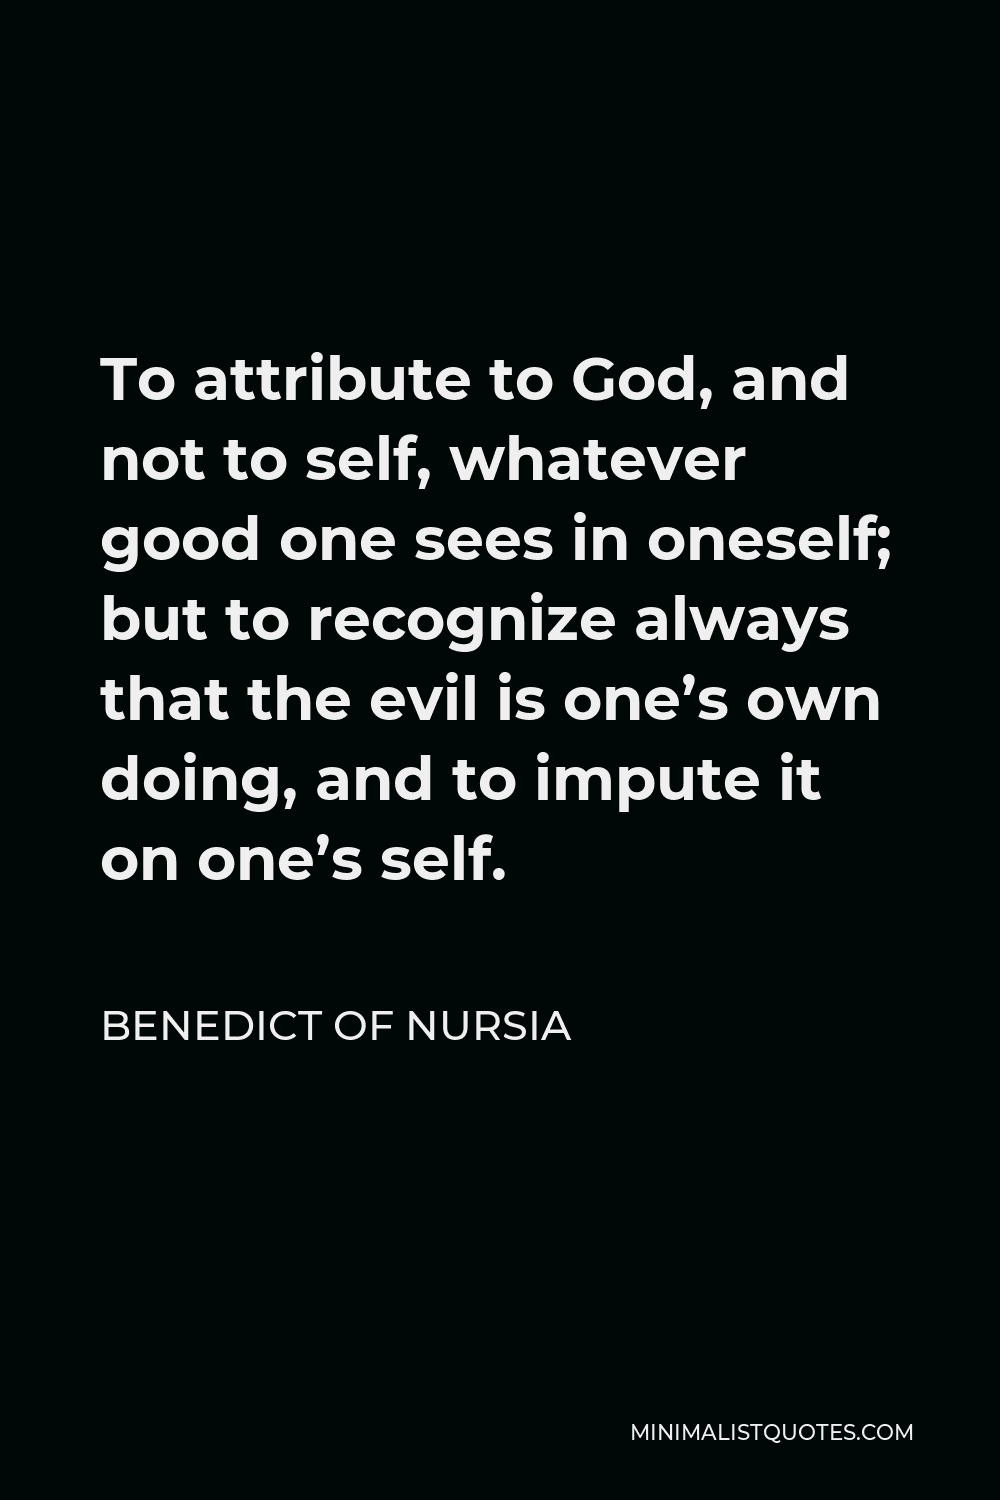 Benedict of Nursia Quote - To attribute to God, and not to self, whatever good one sees in oneself; but to recognize always that the evil is one’s own doing, and to impute it on one’s self.